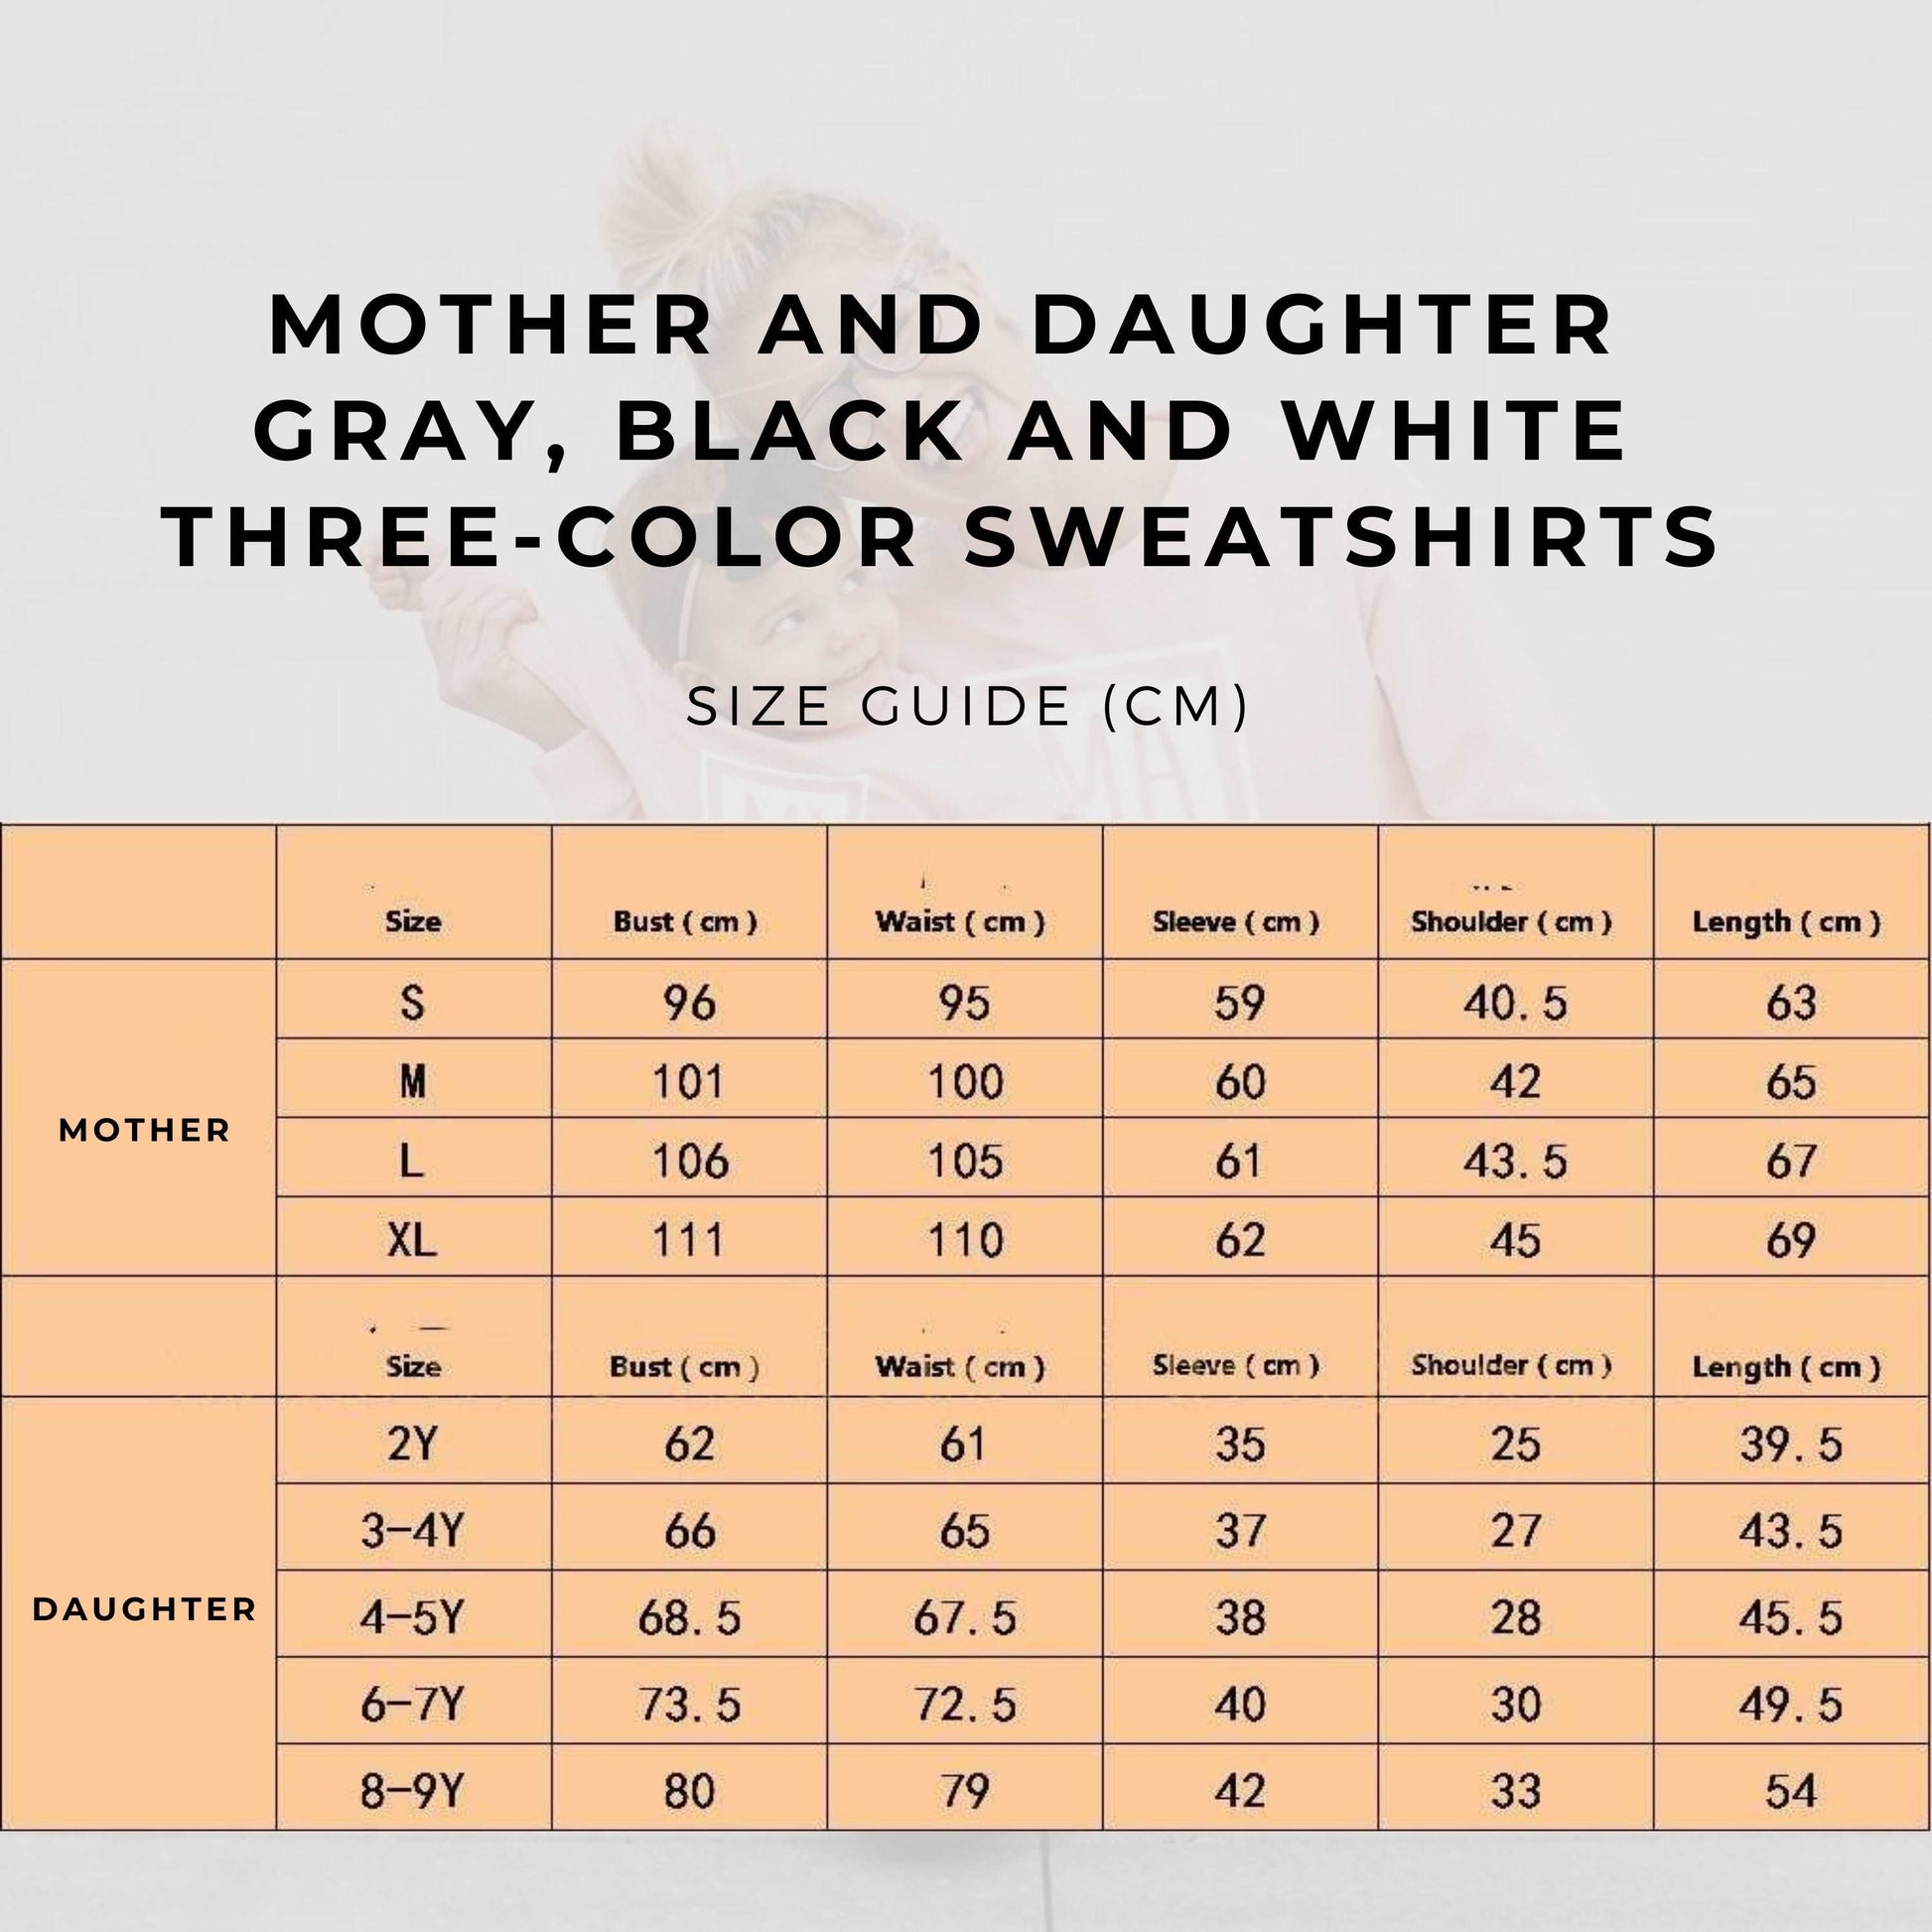 Mother and Daughter Gray, Black And White Three-color Sweatshirts size